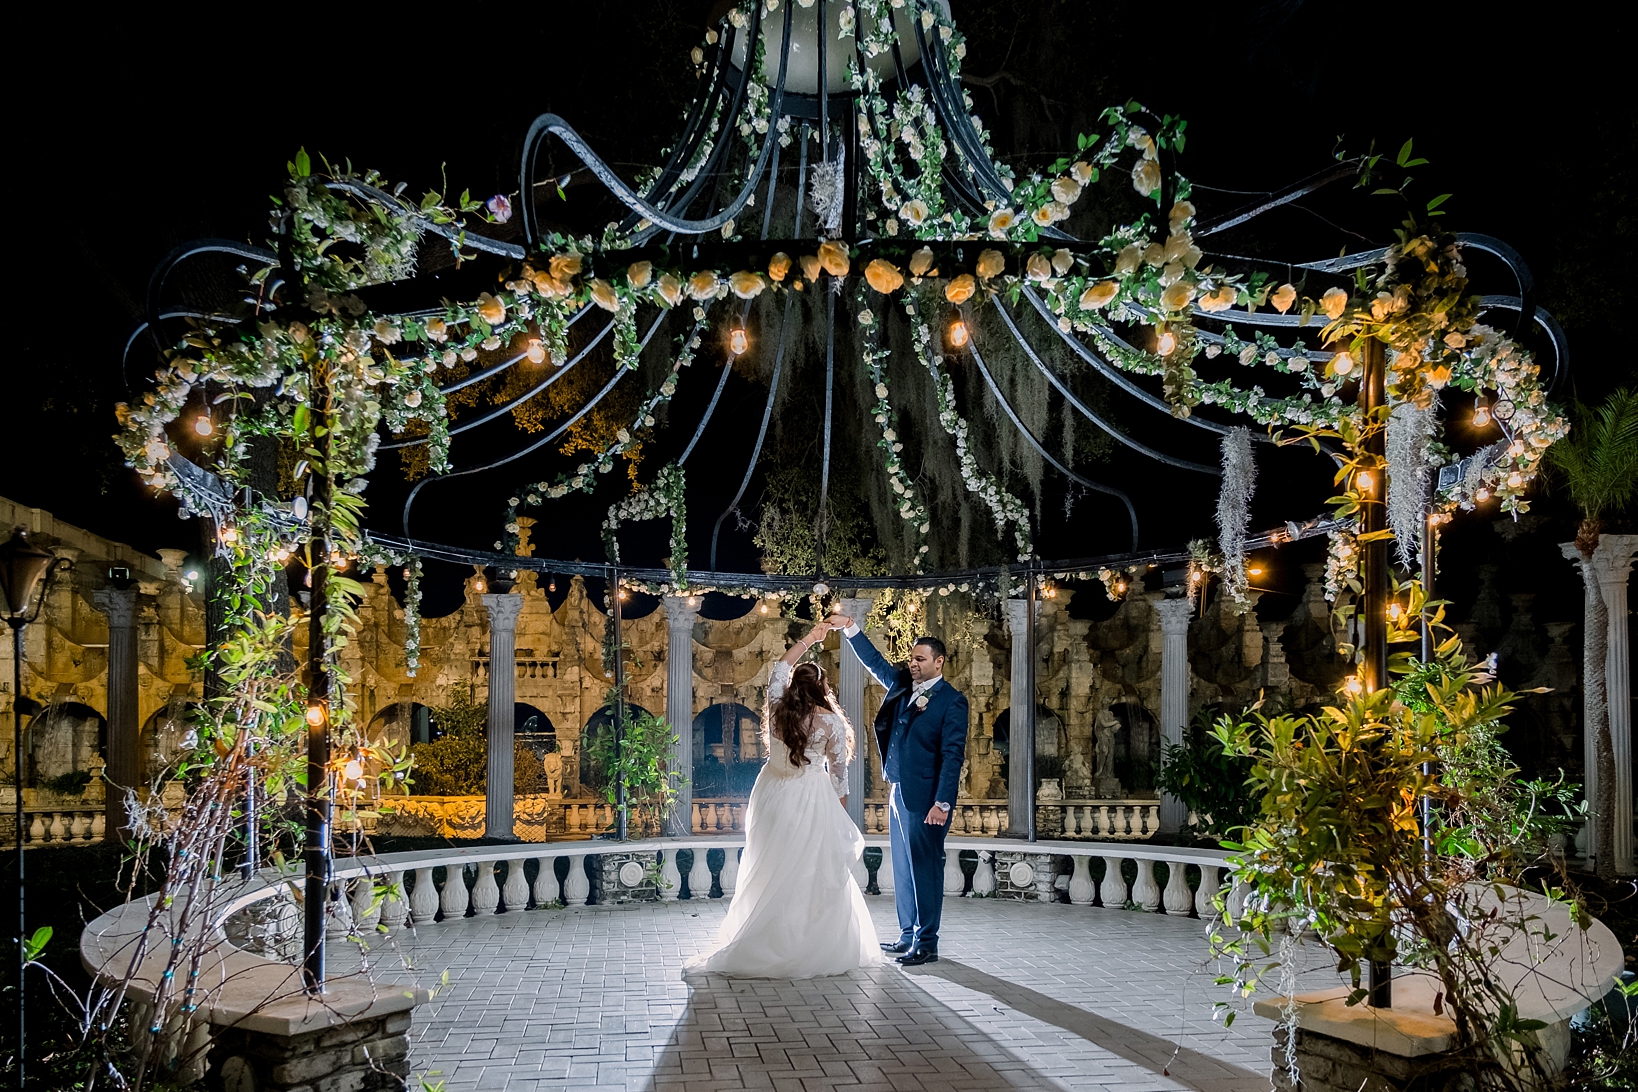 Bride and Groom share a dance in the night under the floral gazebo by Sarah & Ben Photography